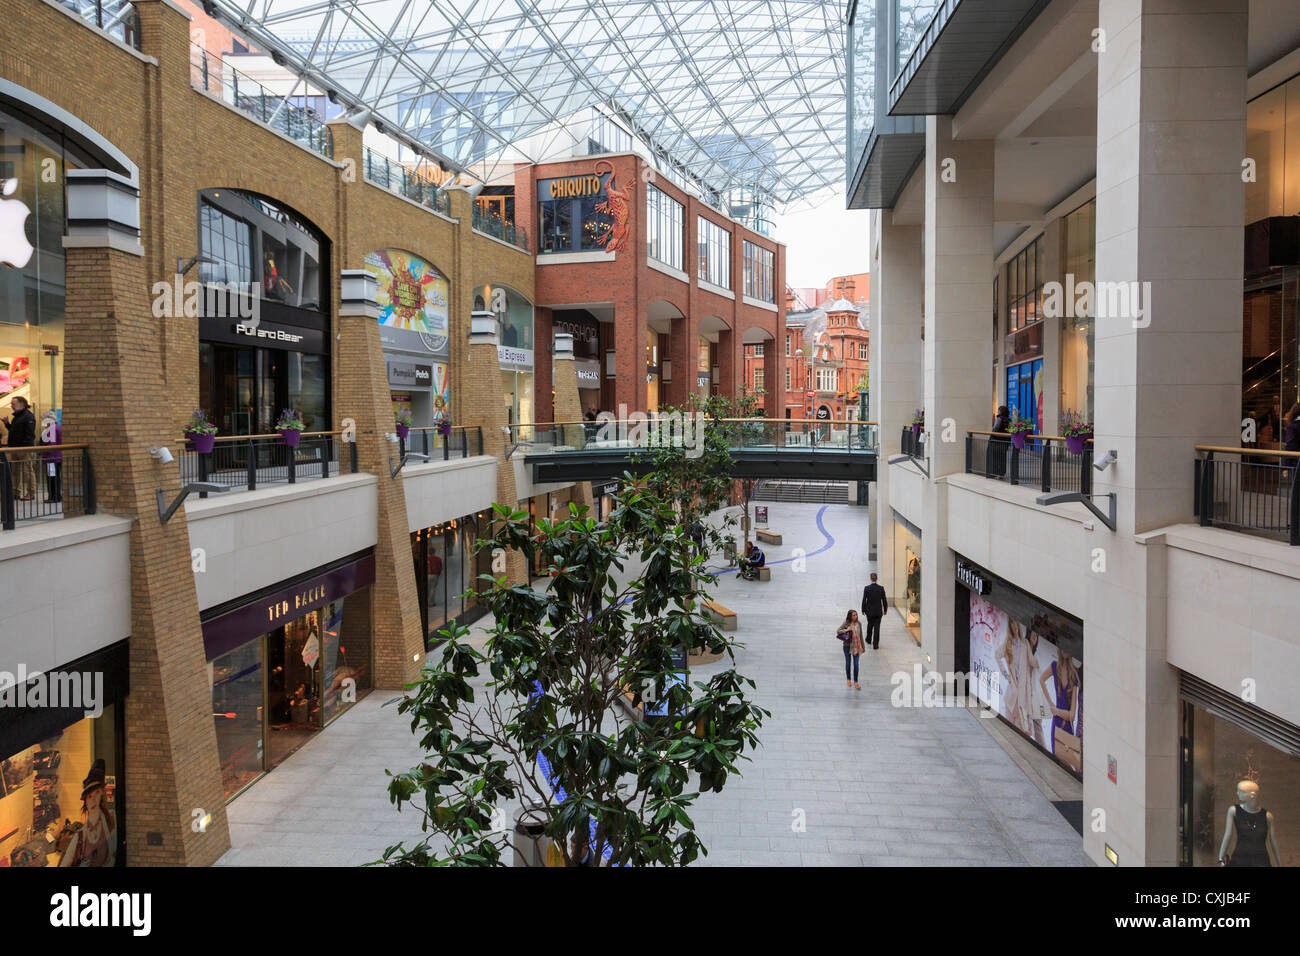 Shops inside the modern glass covered shopping centre in Victoria Square, Belfast, County Antrim, Northern Ireland, UK Stock Photo